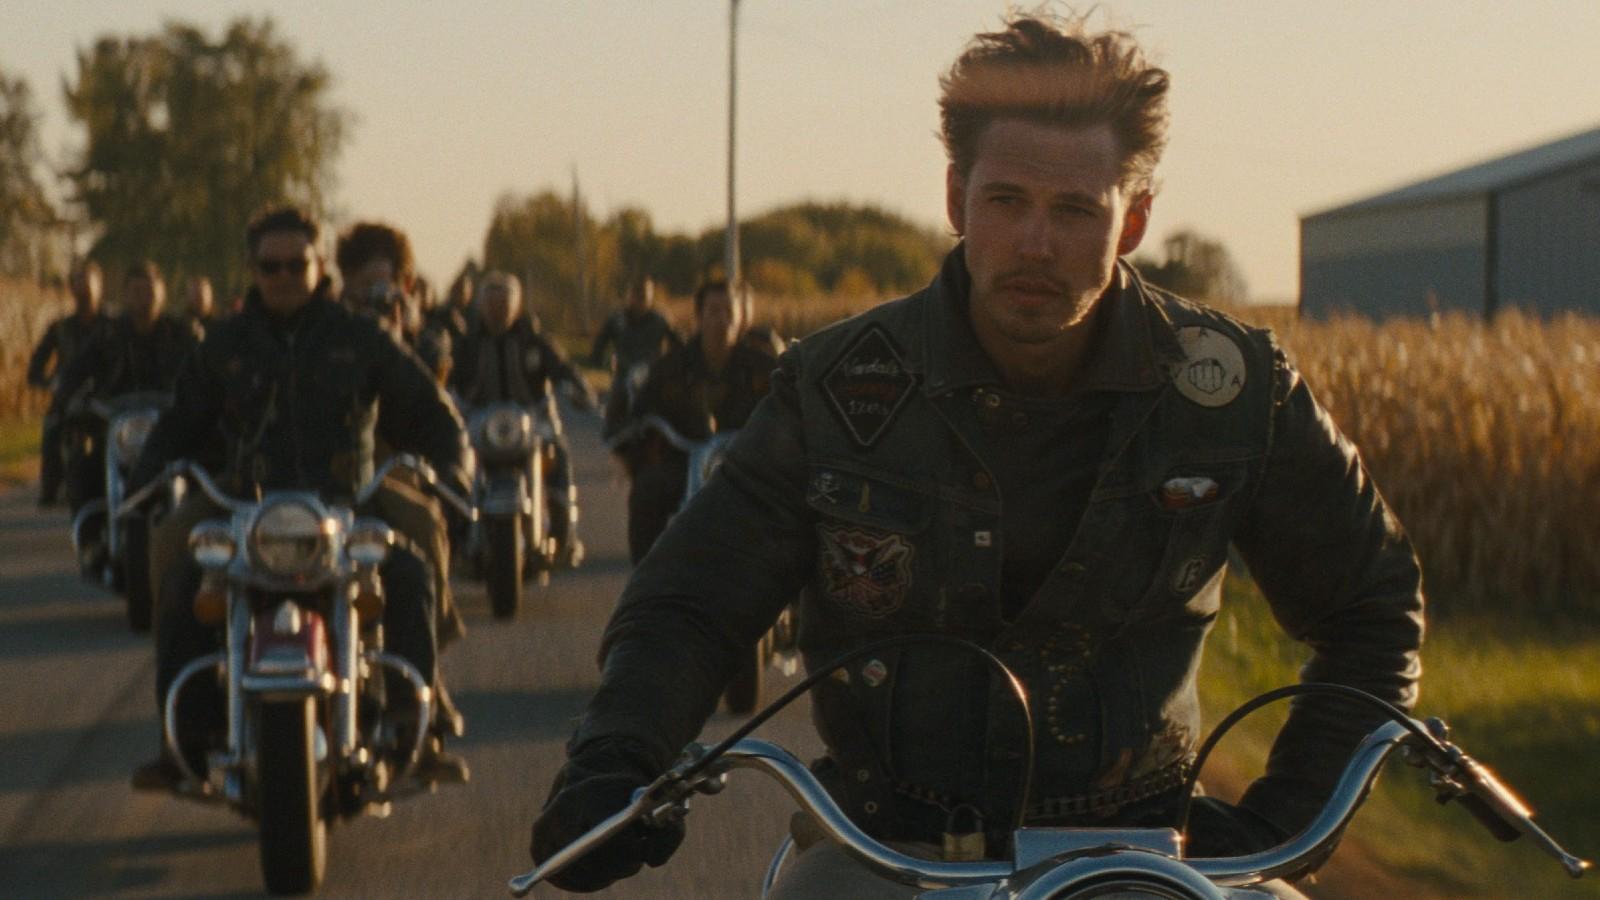 Austin Butler riding a motorcycle in The Bikeriders.